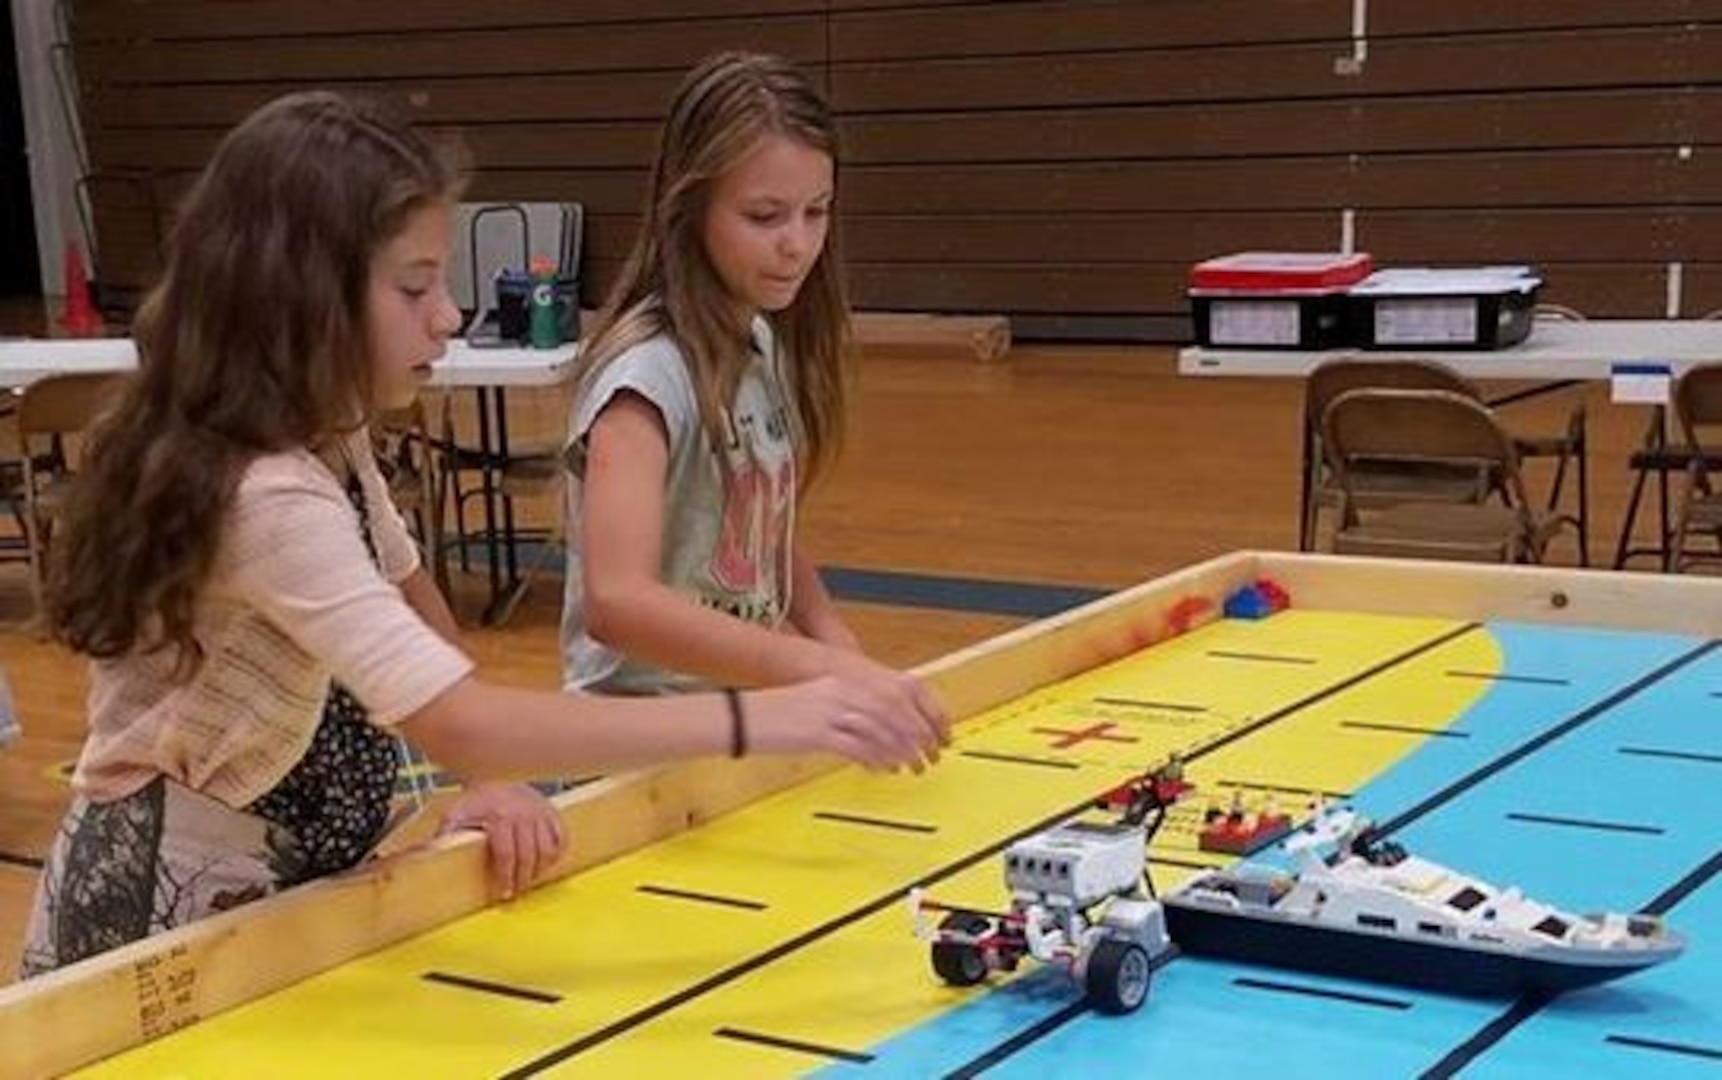 IMAGE: KING GEORGE. Va. (June 28, 2018) - Middle school students prepare to deploy robots they designed, built, and programmed to respond to 10 missions - including the delivery of humanitarian aid, rotating troops and transporting an electromagnetic railgun to the deck of a Navy ship - at the 2018 STEM Summer Academy. The students briefed their mentors, teachers, and visitors on how they overcame a variety of Navy focused problems with STEM, creativity, communication, and teamwork throughout the week-long academy.